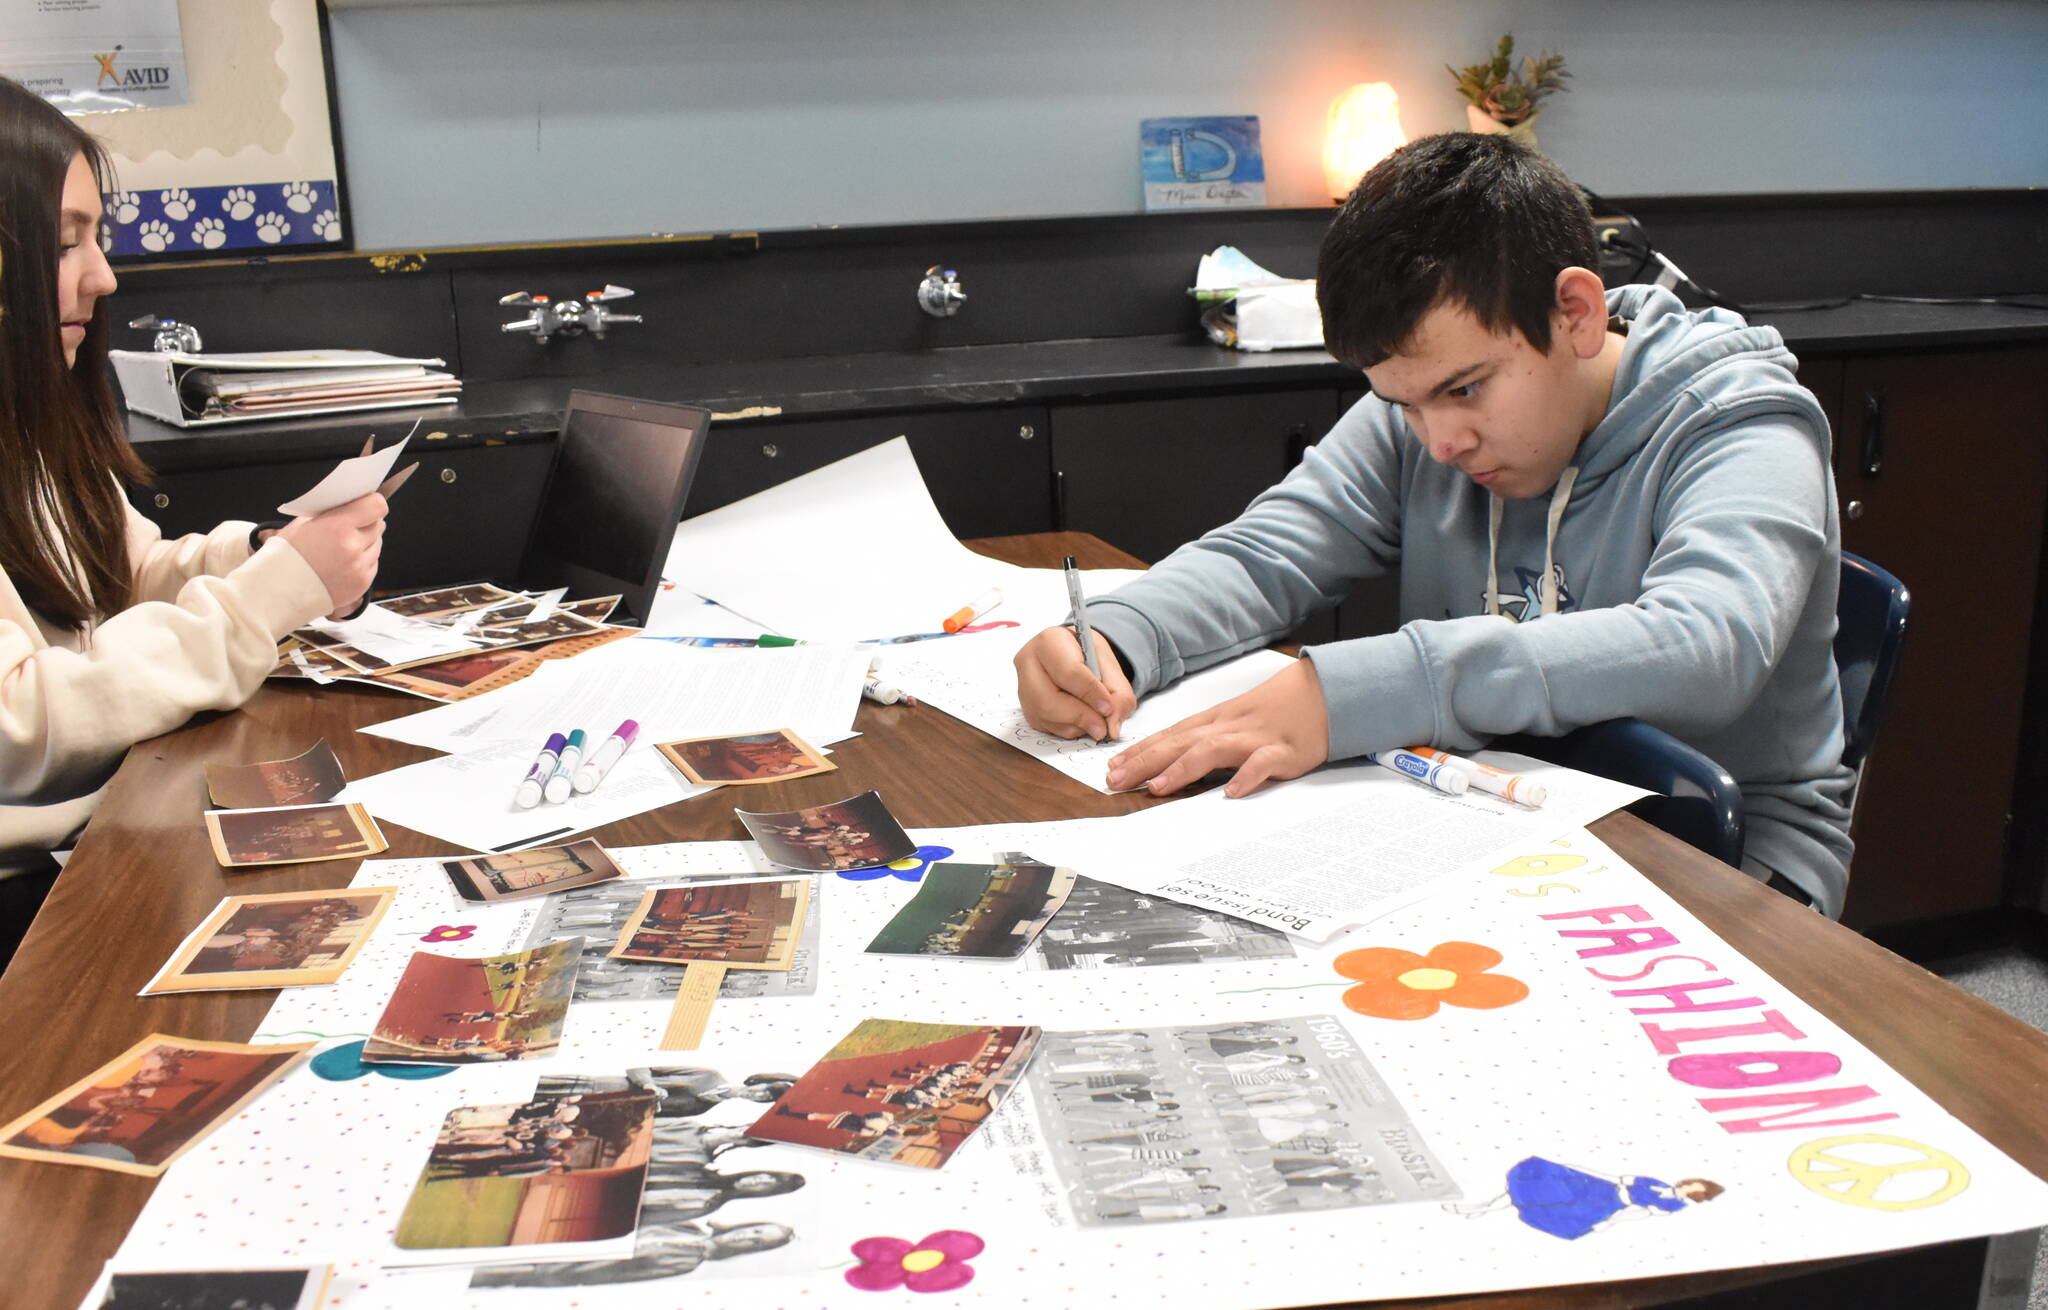 Clayton Franke / The Daily World
Anthony Ceja works on a poster displaying information about the 1960s and 70s on Friday Jan. 19. The poster will be on display during the Miller Junior High School centennial celebration Sunday, Jan. 28 — which also happens to be Ceja’s birthday.